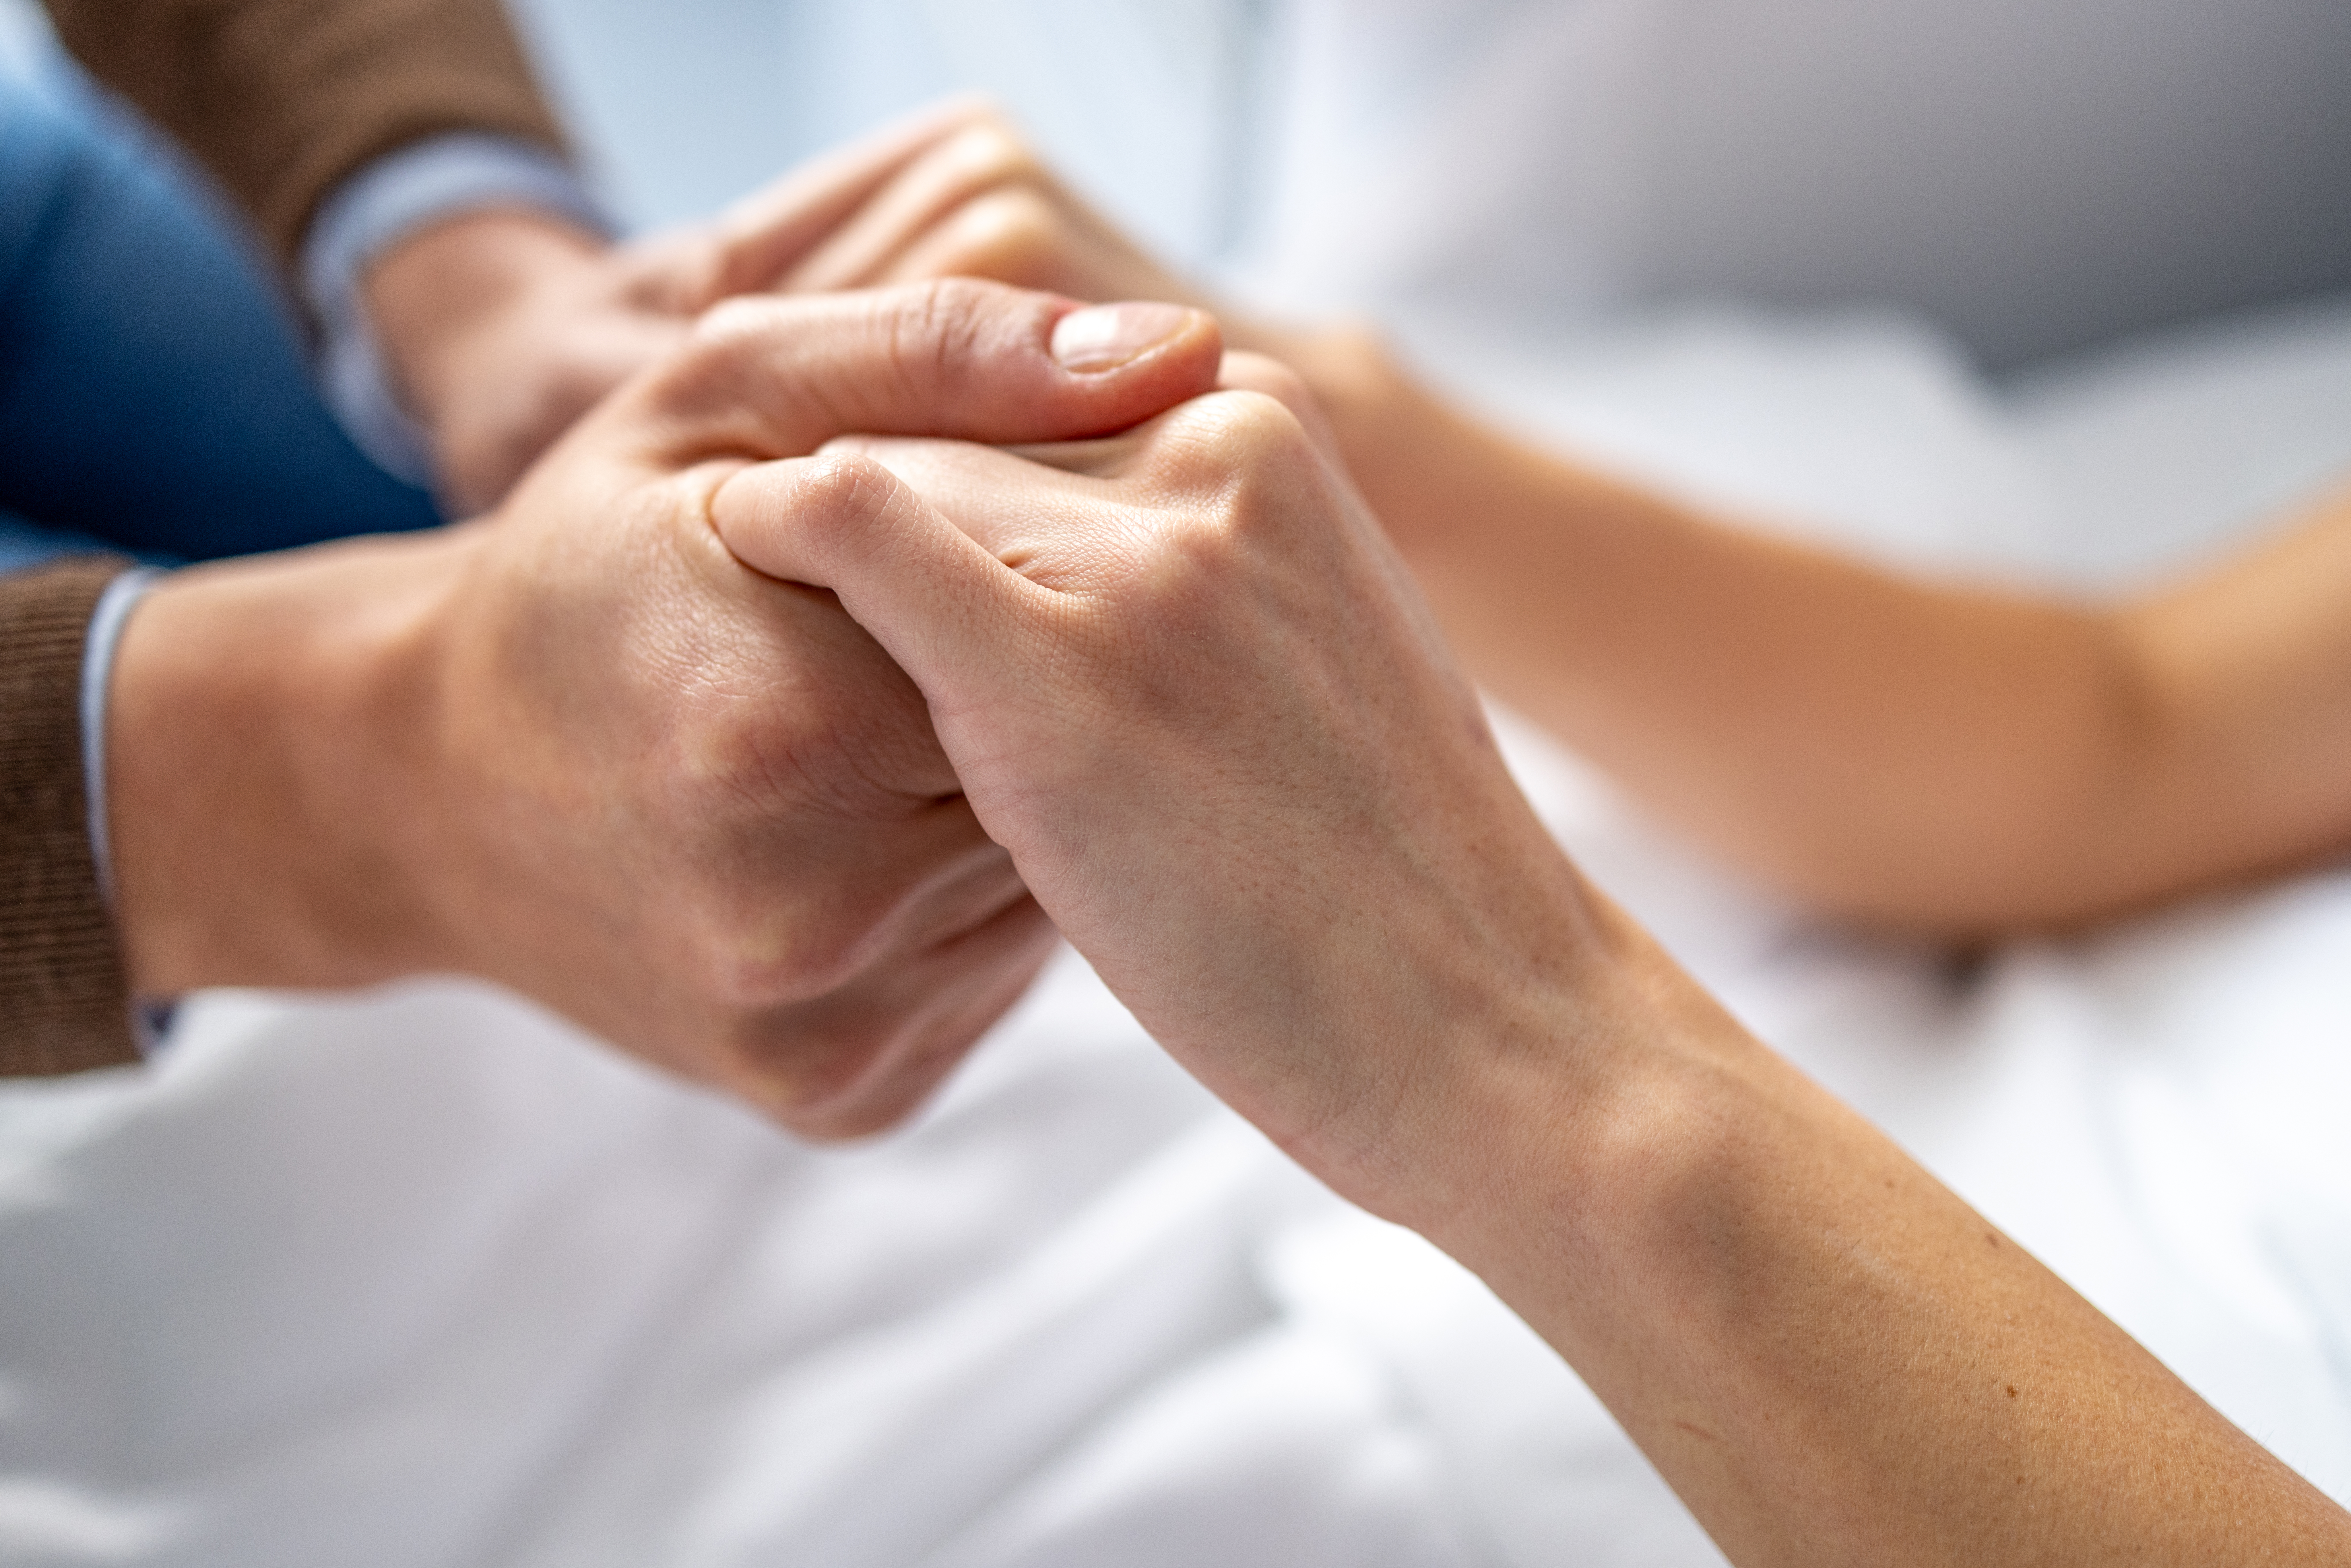 A man and woman holding hands as a gesture of support and comfort | Source: Getty Images